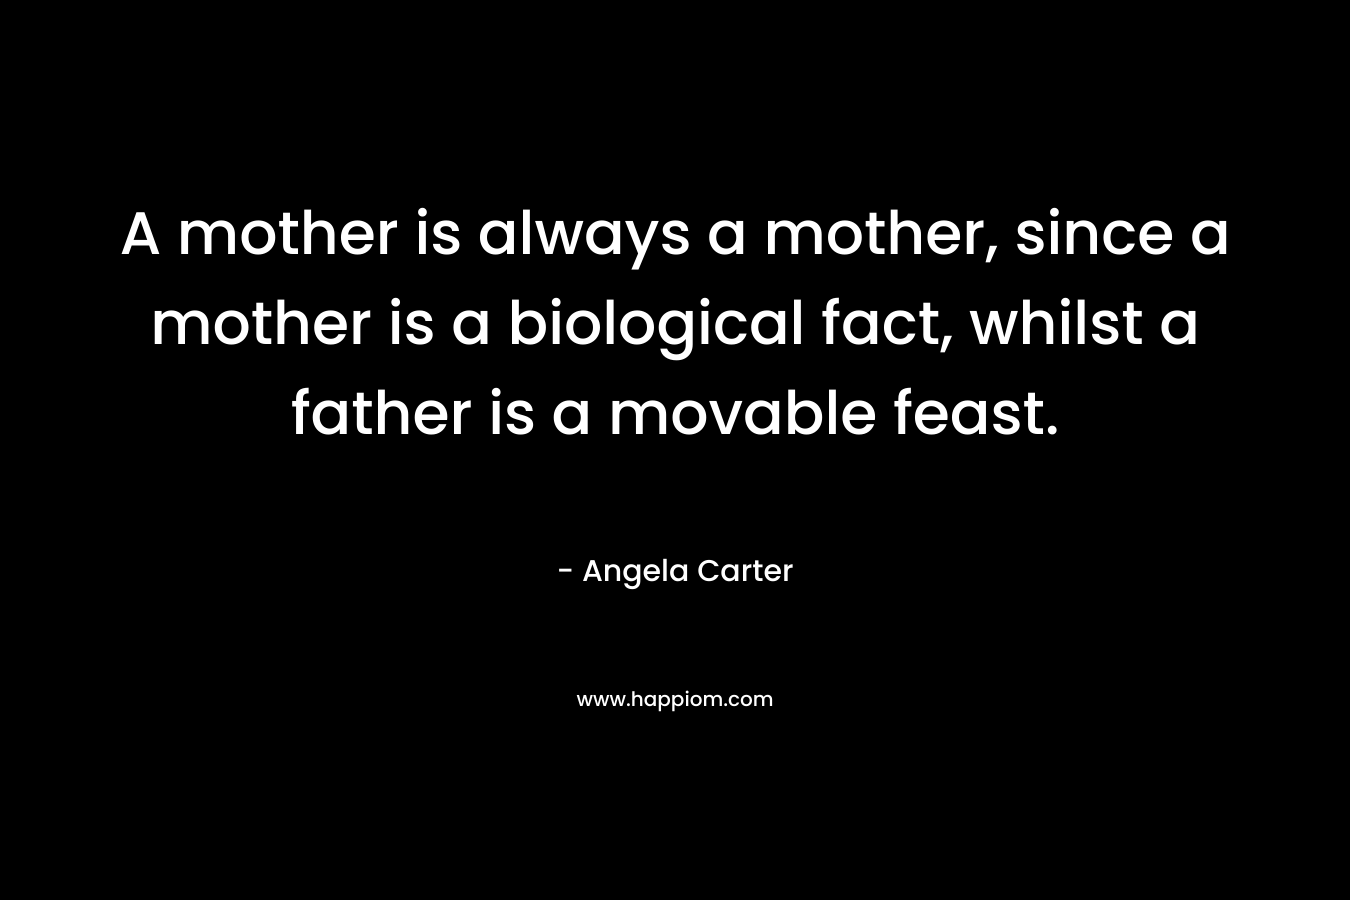 A mother is always a mother, since a mother is a biological fact, whilst a father is a movable feast.